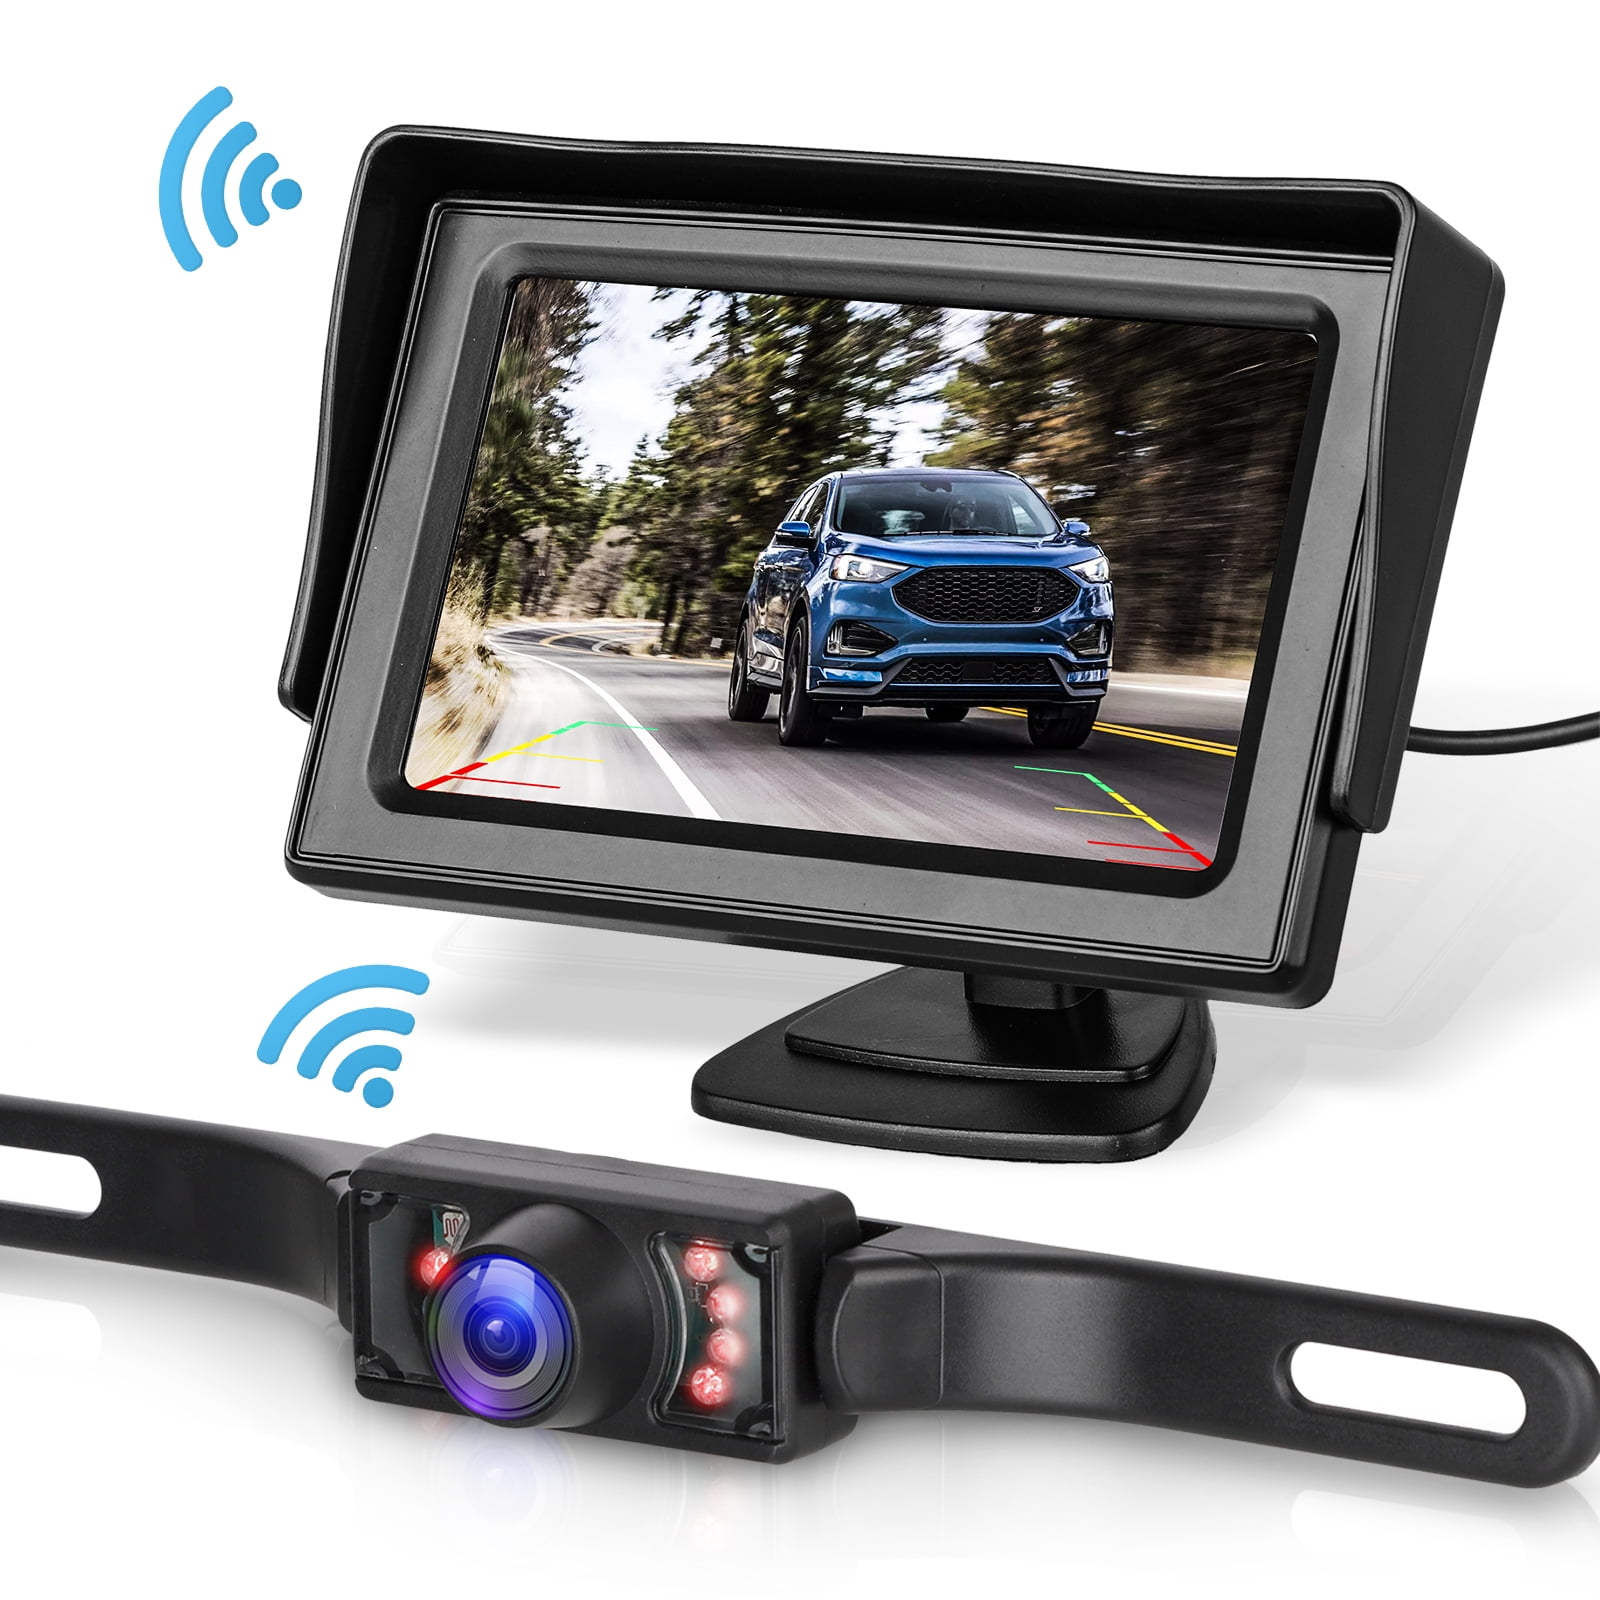 Pickups OBEST 4.3 Wireless Backup Camera and Monitor Kit丨Waterproof Night Vision Front/Rear View Camera with Grid Line丨Easy Installation for Cars Trucks Camping Car SUV 